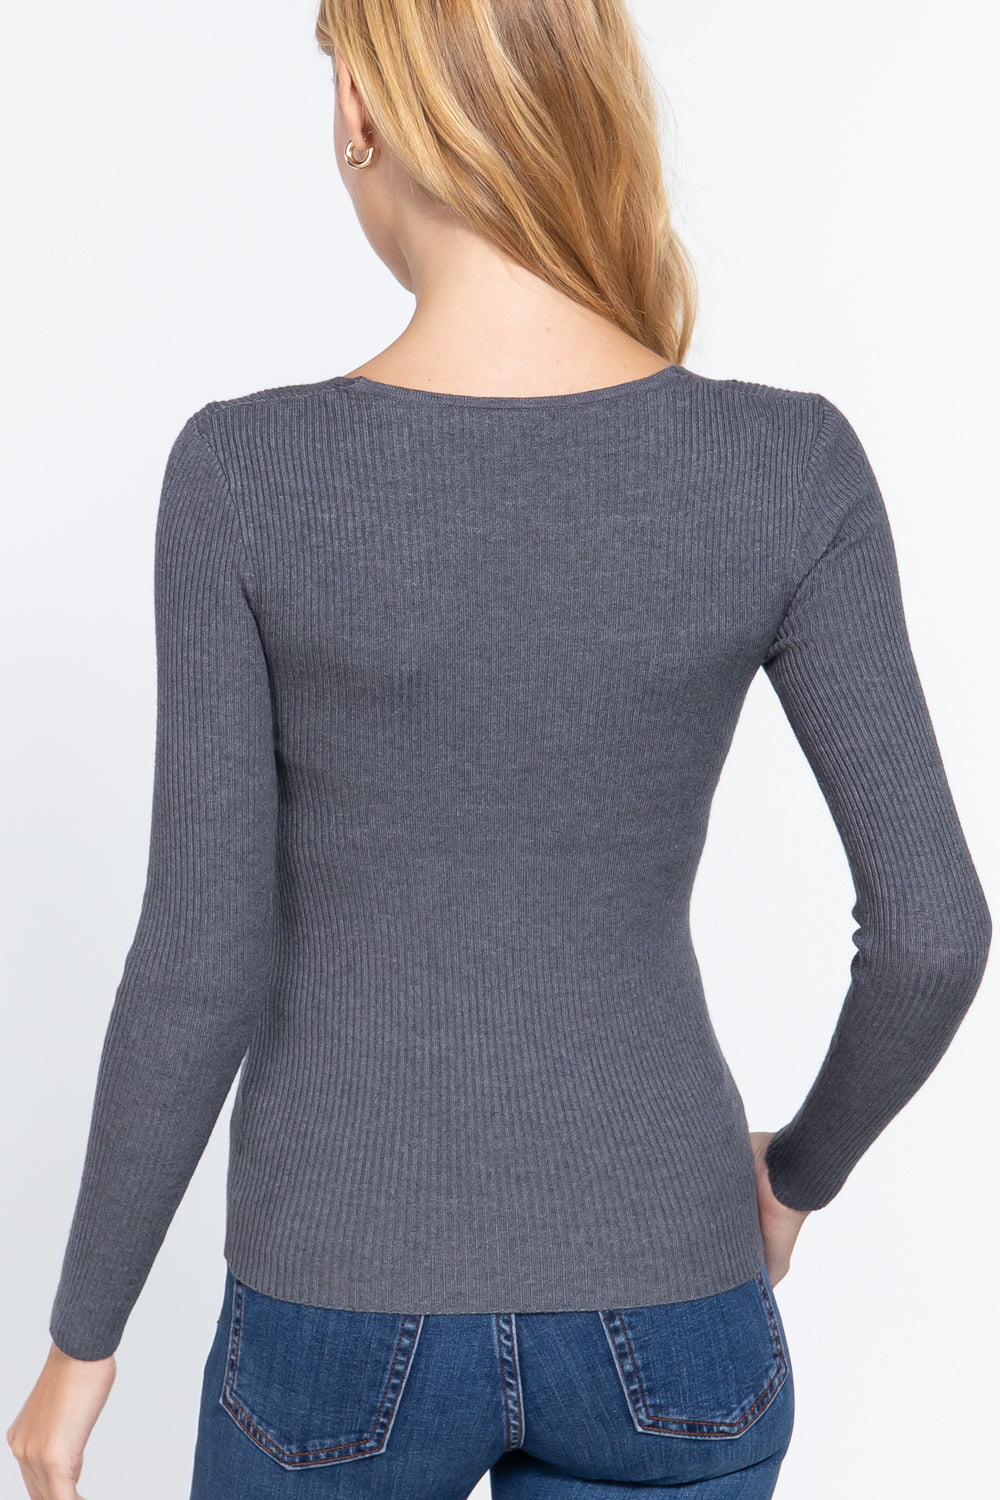 Ribbed V-Neck Sweater in Charcoal